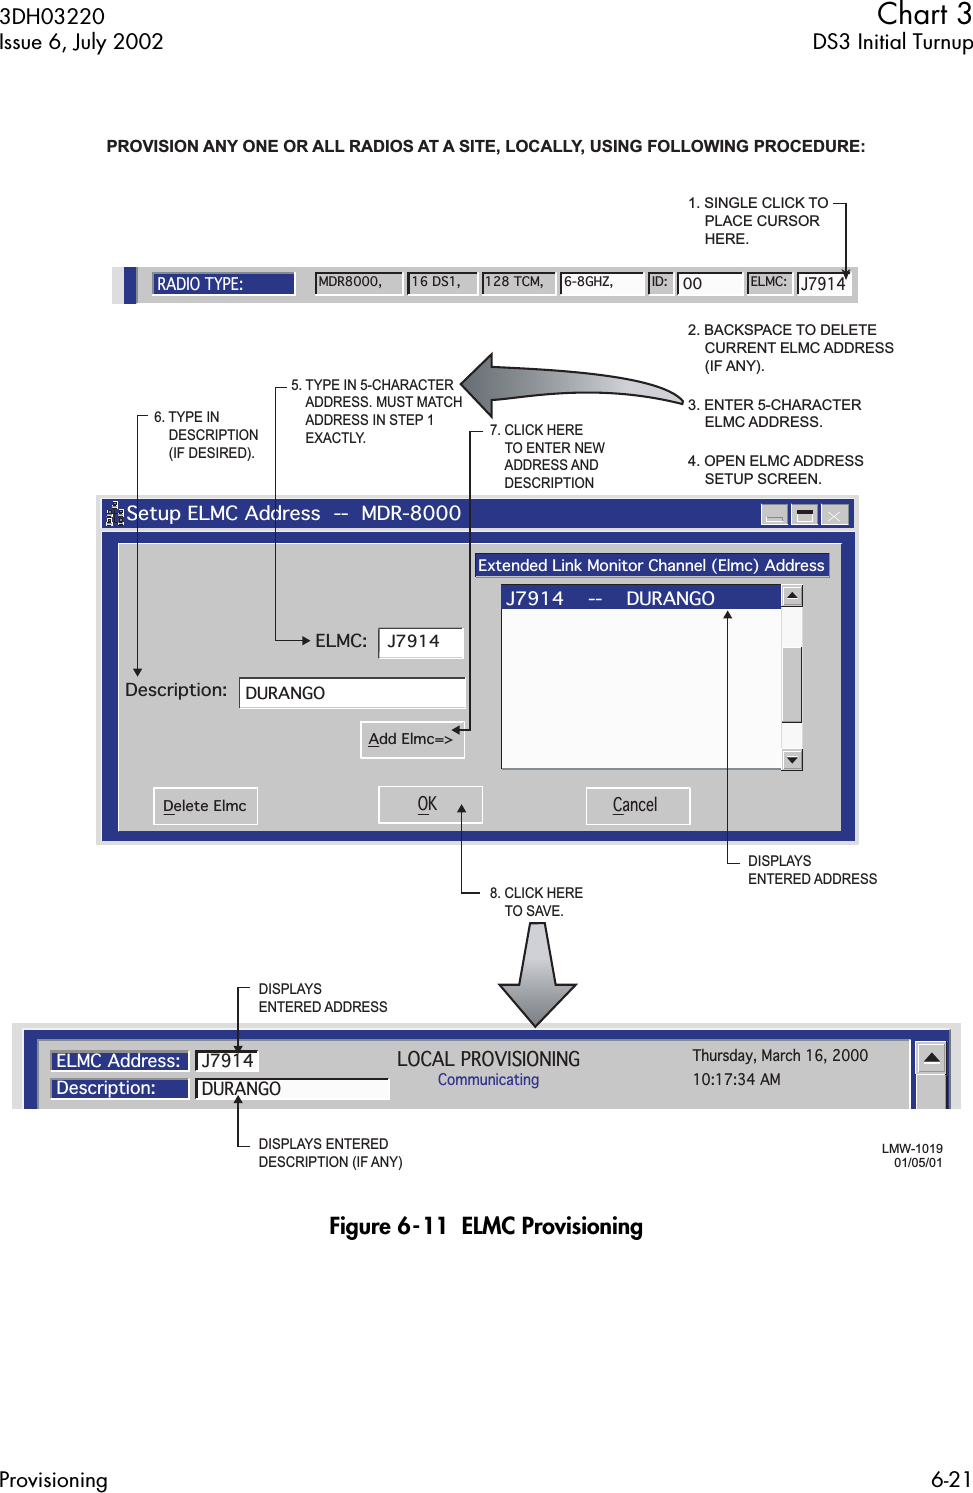  3DH03220 Chart 3 Issue 6, July 2002 DS3 Initial TurnupProvisioning 6-21 Figure 6-11  ELMC Provisioning   Setup ELMC Address  --  MDR-8000Extended Link Monitor Channel (Elmc) AddressJ7914DURANGODescription:ELMC:OK CancelDelete ElmcAdd Elmc=&gt;J7914    --    DURANGO5. TYPE IN 5-CHARACTER  ADDRESS. MUST MATCH  ADDRESS IN STEP 1  EXACTLY.6. TYPE IN  DESCRIPTION  (IF DESIRED).7. CLICK HERE TO ENTER NEW ADDRESS AND  DESCRIPTION8. CLICK HERE TO SAVE.PROVISION ANY ONE OR ALL RADIOS AT A SITE, LOCALLY, USING FOLLOWING PROCEDURE:LOCAL PROVISIONINGCommunicatingELMC Address:Description:DURANGOJ7914Thursday, March 16, 200010:17:34 AM2. BACKSPACE TO DELETE   CURRENT ELMC ADDRESS  (IF ANY).3. ENTER 5-CHARACTER ELMC ADDRESS.4. OPEN ELMC ADDRESS   SETUP SCREEN.LMW-101901/05/01RADIO TYPE:MDR8000, 16 DS1, 128 TCM, 6-8GHZ, 00 ELMC:ID:J79141. SINGLE CLICK TO  PLACE CURSOR   HERE.DISPLAYS ENTERED ADDRESSDISPLAYS ENTERED DESCRIPTION (IF ANY)DISPLAYS ENTERED ADDRESS